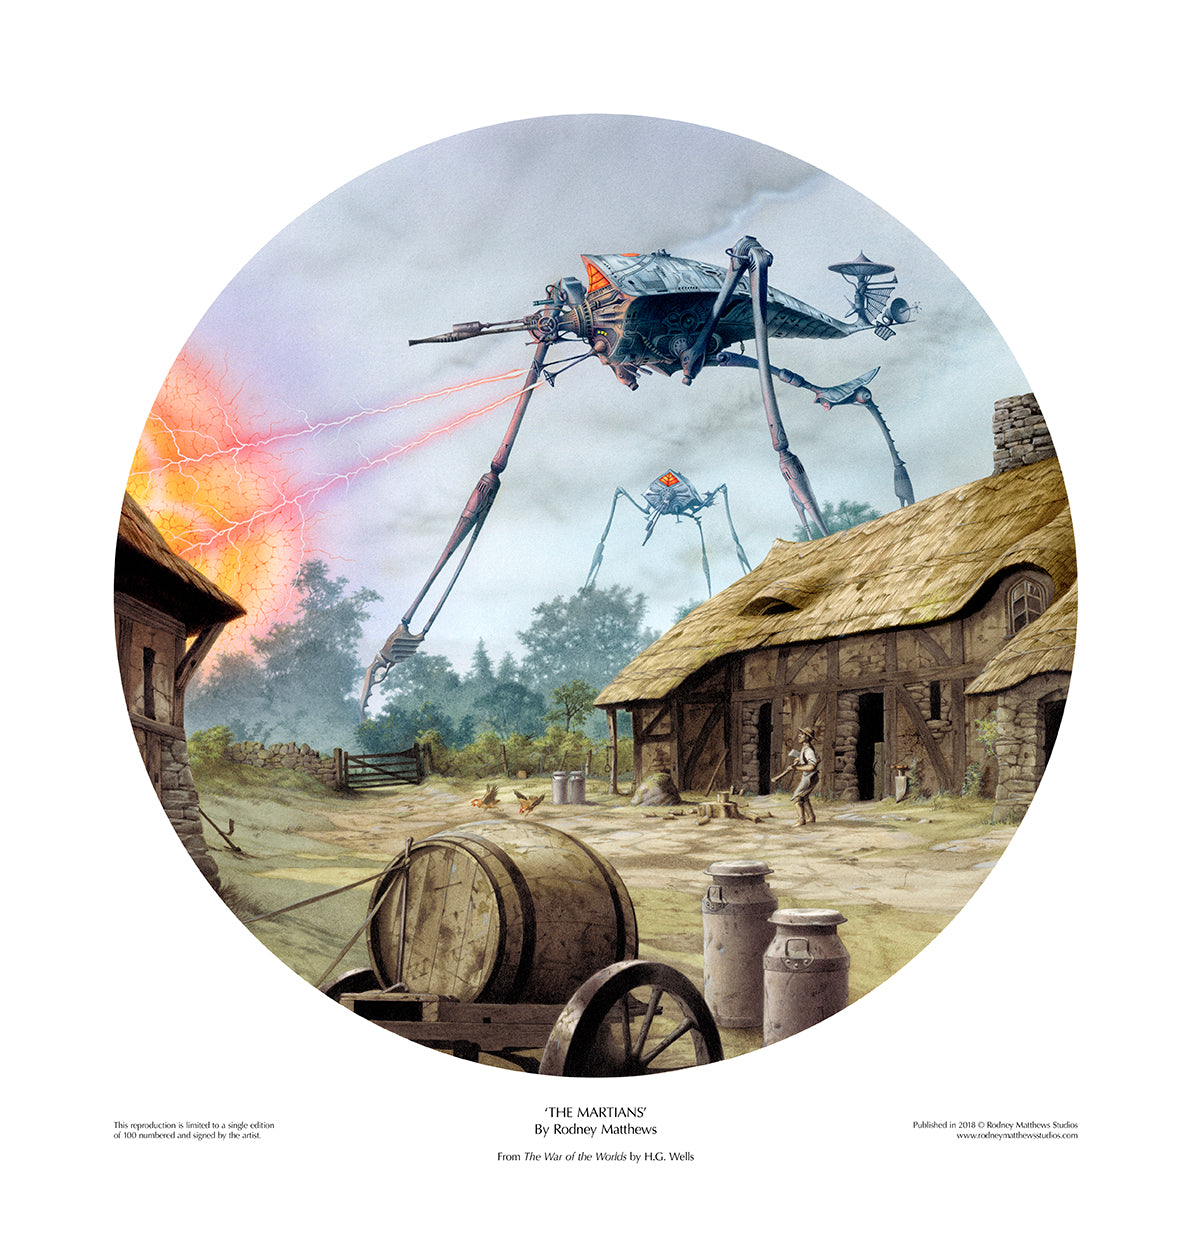 The War of the Worlds: The Martians limited edition giclèe art print